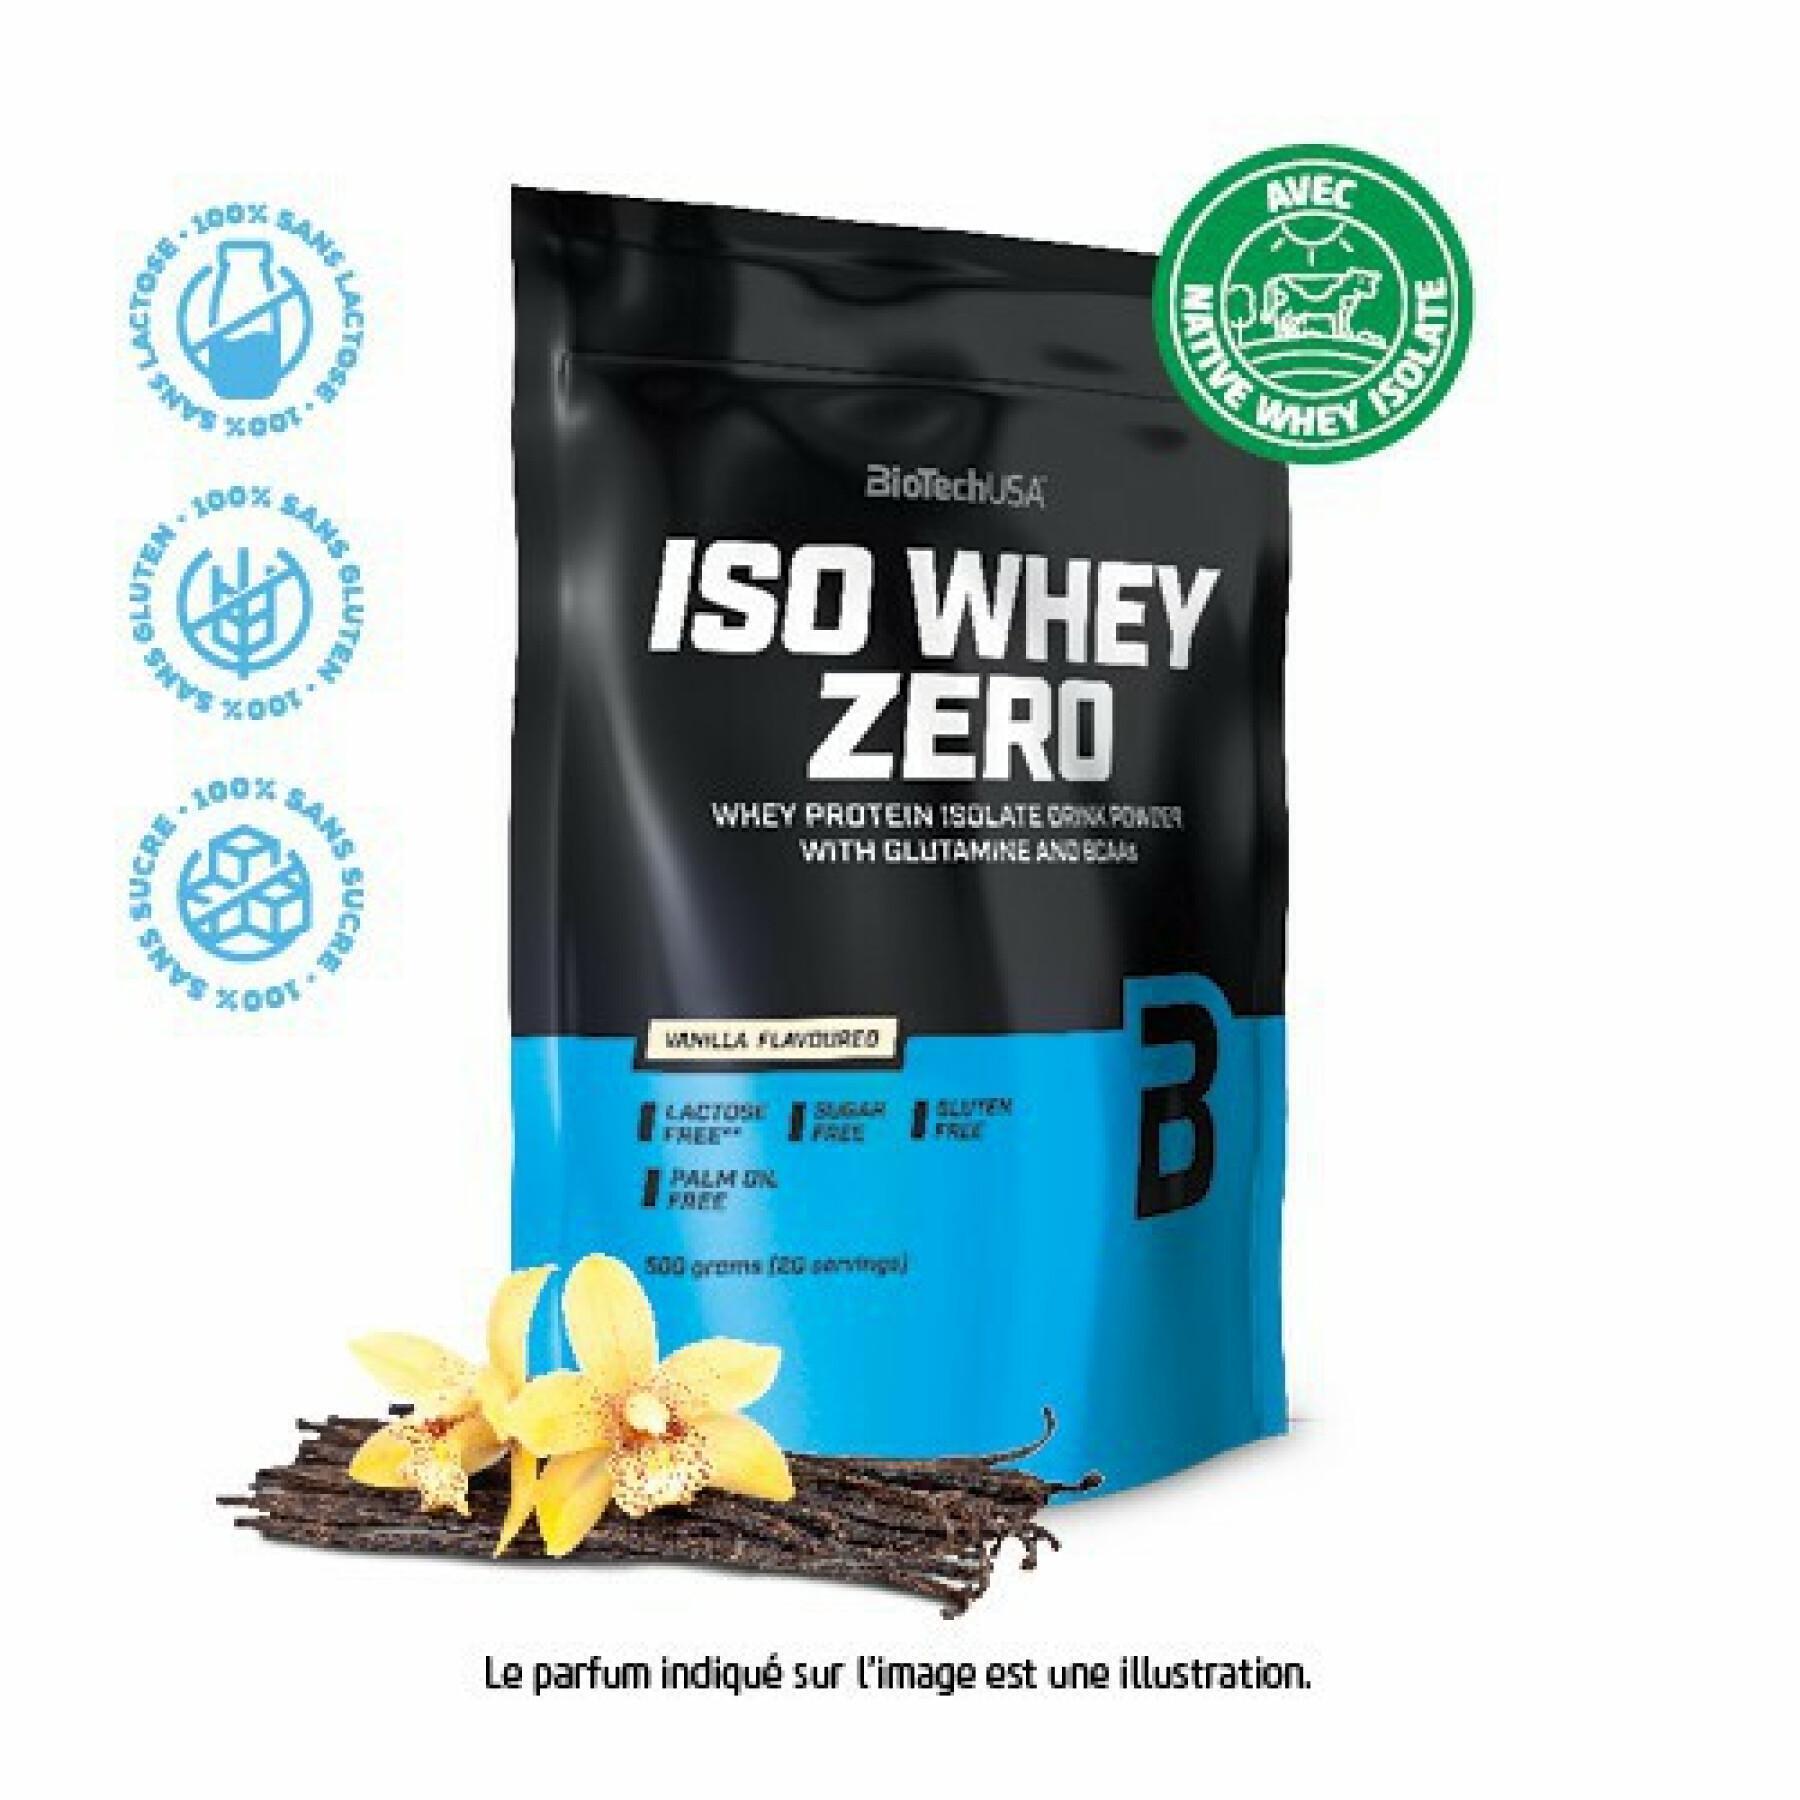 Pack of 10 bags of protein Biotech USA iso whey zero lactose free - Vanille - 500g